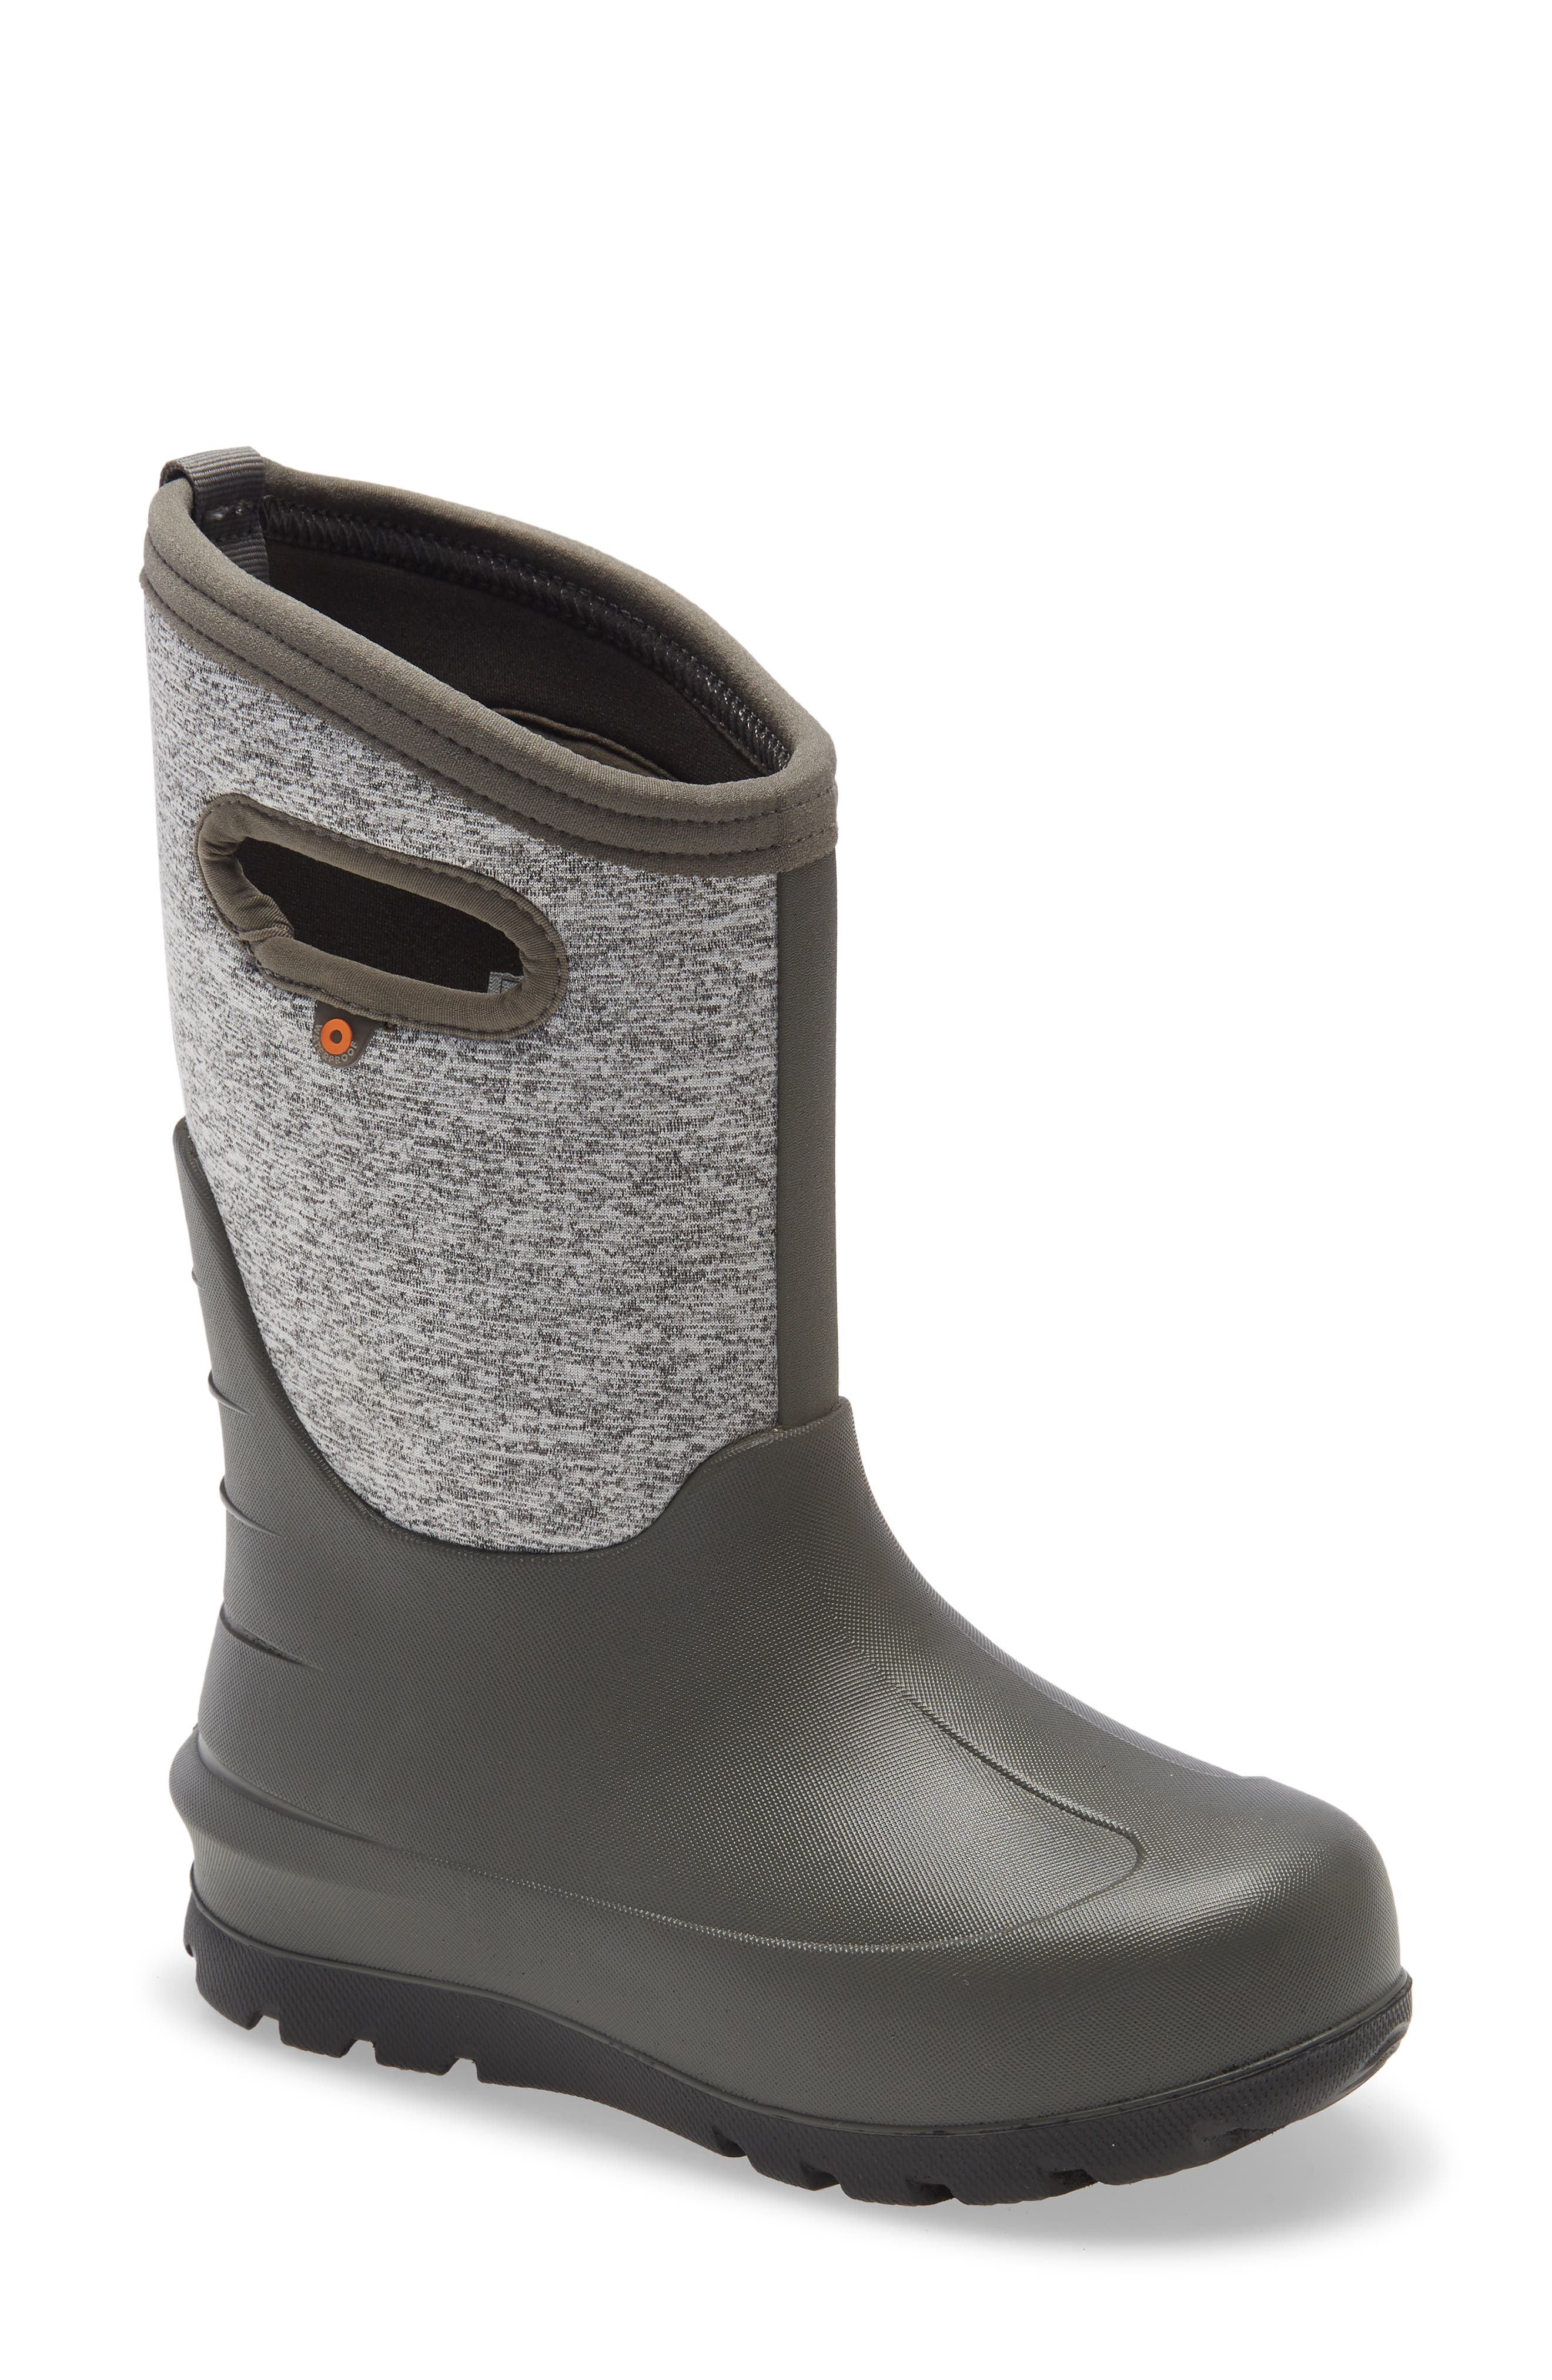 bogs winter boots for toddlers